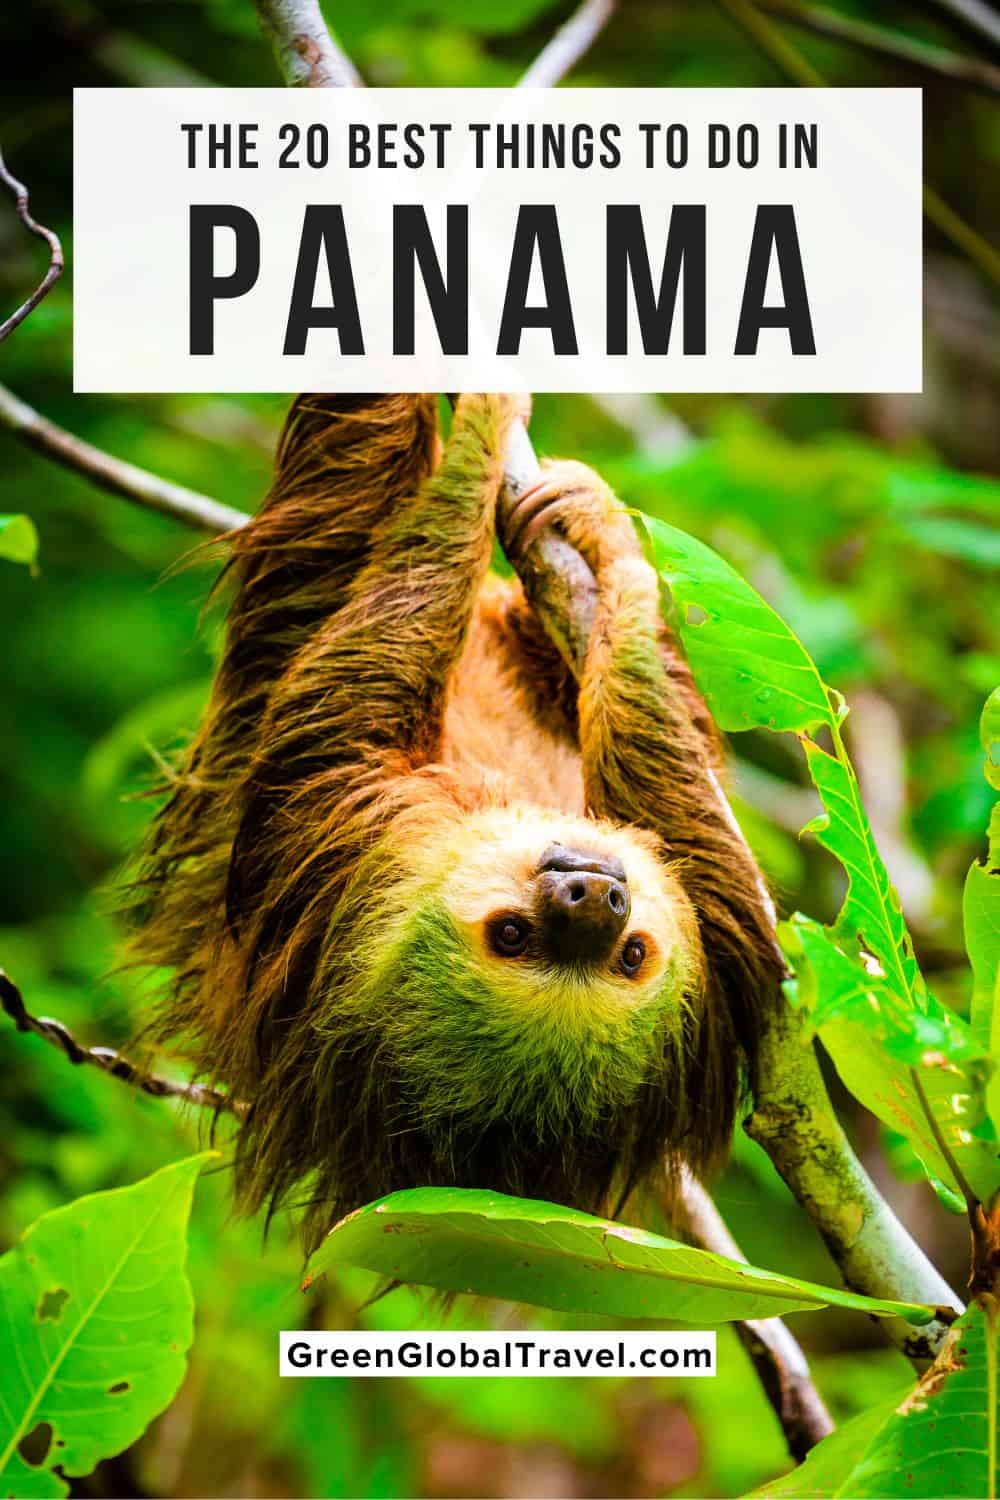 Our picks for the 20 Best Things to Do in Panama, Central America with a focus on Panama attractions geared to nature and history lovers. | things to do in panama city panama | what to do in panama | panama things to do | attractions in panama | places to visit in panama | what is panama known for | best places to visit in panama | destinations in panama | panama activities | panama destinations | panama in central america | panama places to visit | things to do in bocas del toro |